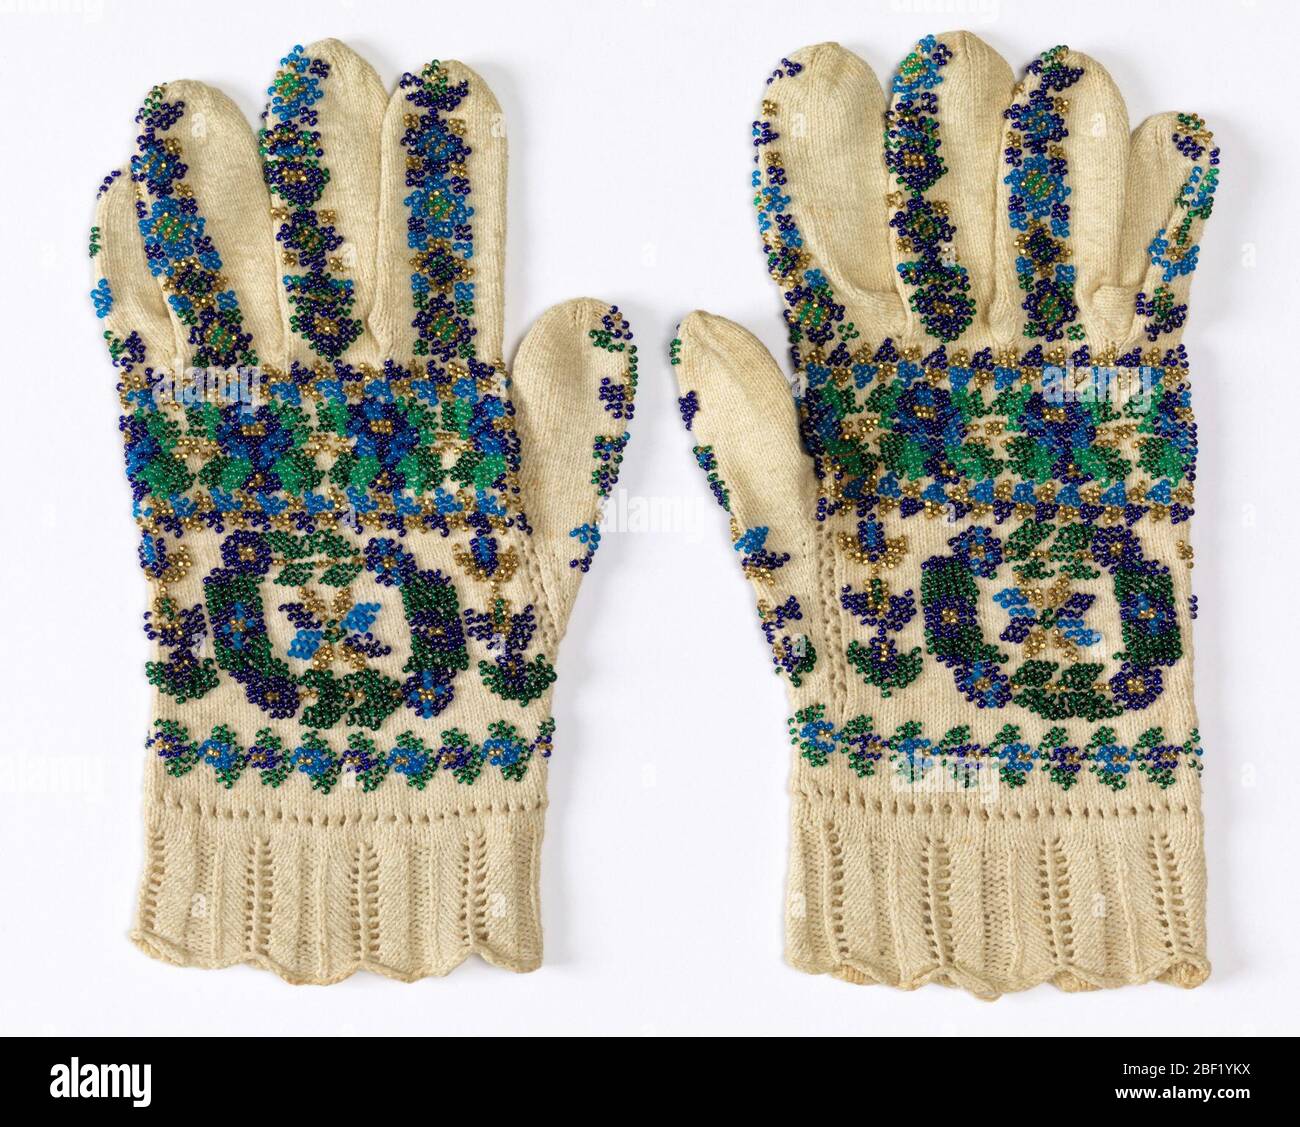 Gloves. Gloves ornamented with blue, green and gold beads in design of conventionalized flowers. Stock Photo